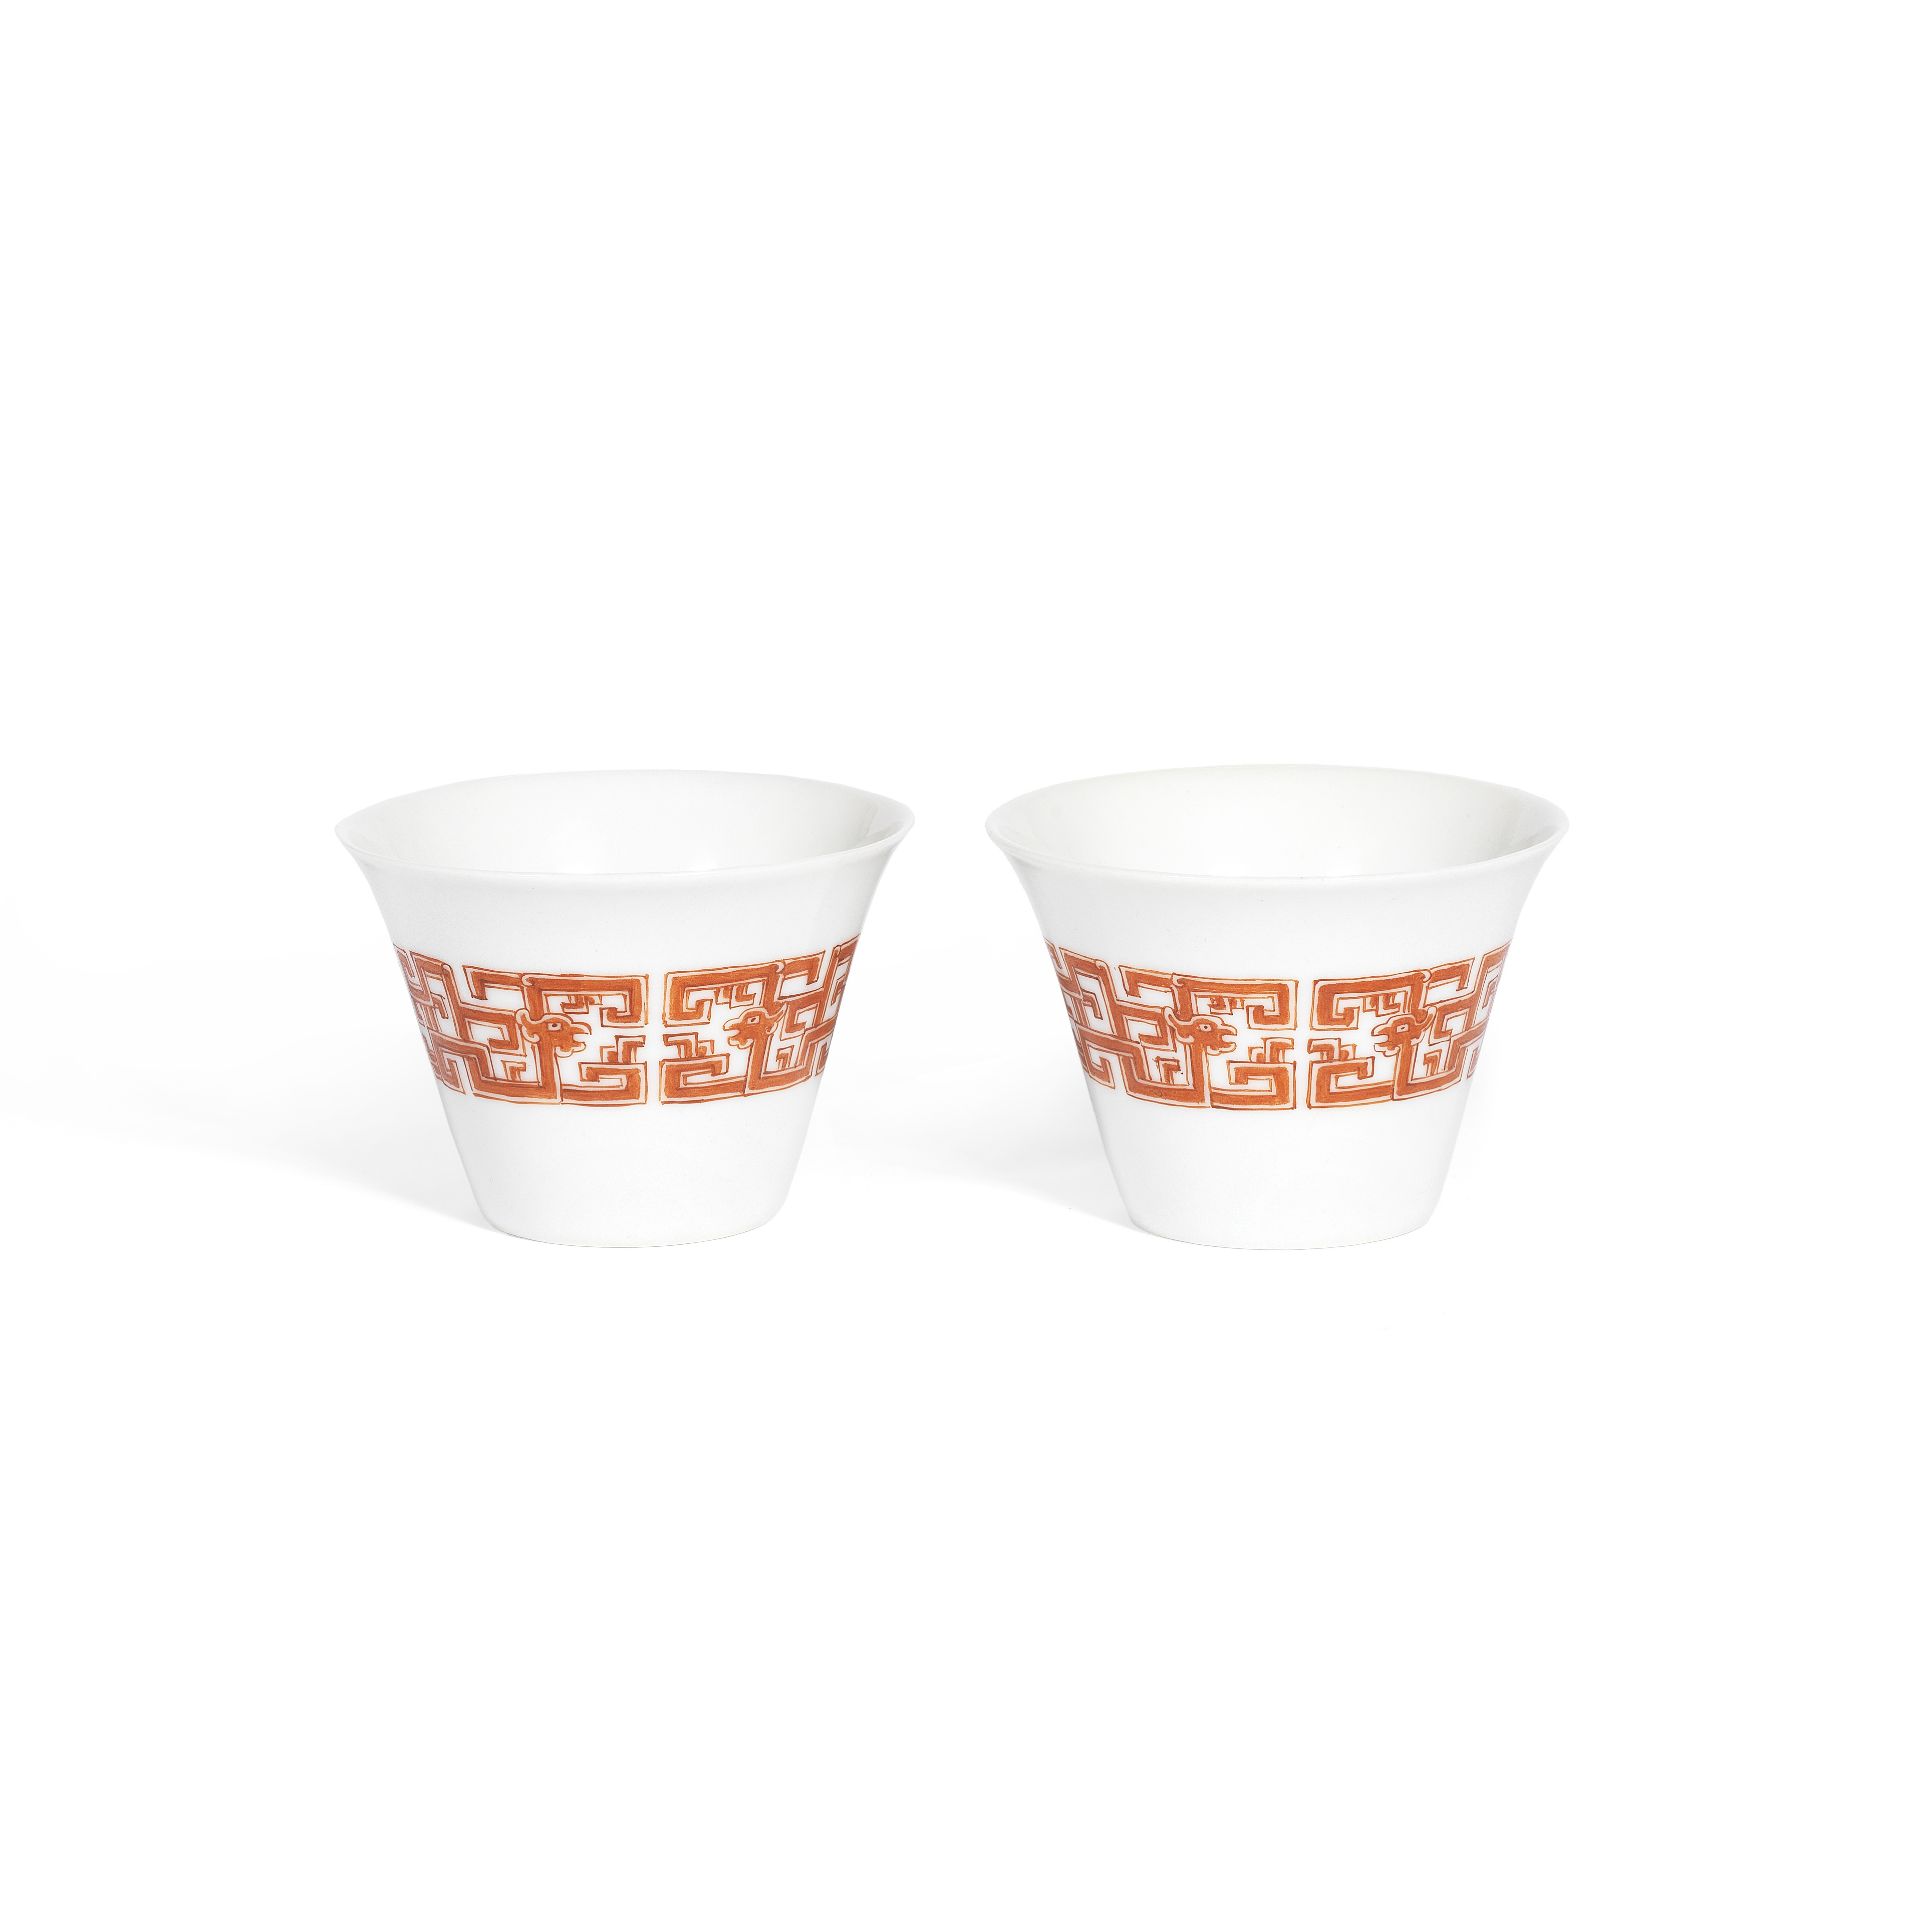 A PAIR OF IRON-RED-DECORATED CUPS Yongzheng four-character marks, 19th/20th century (2)